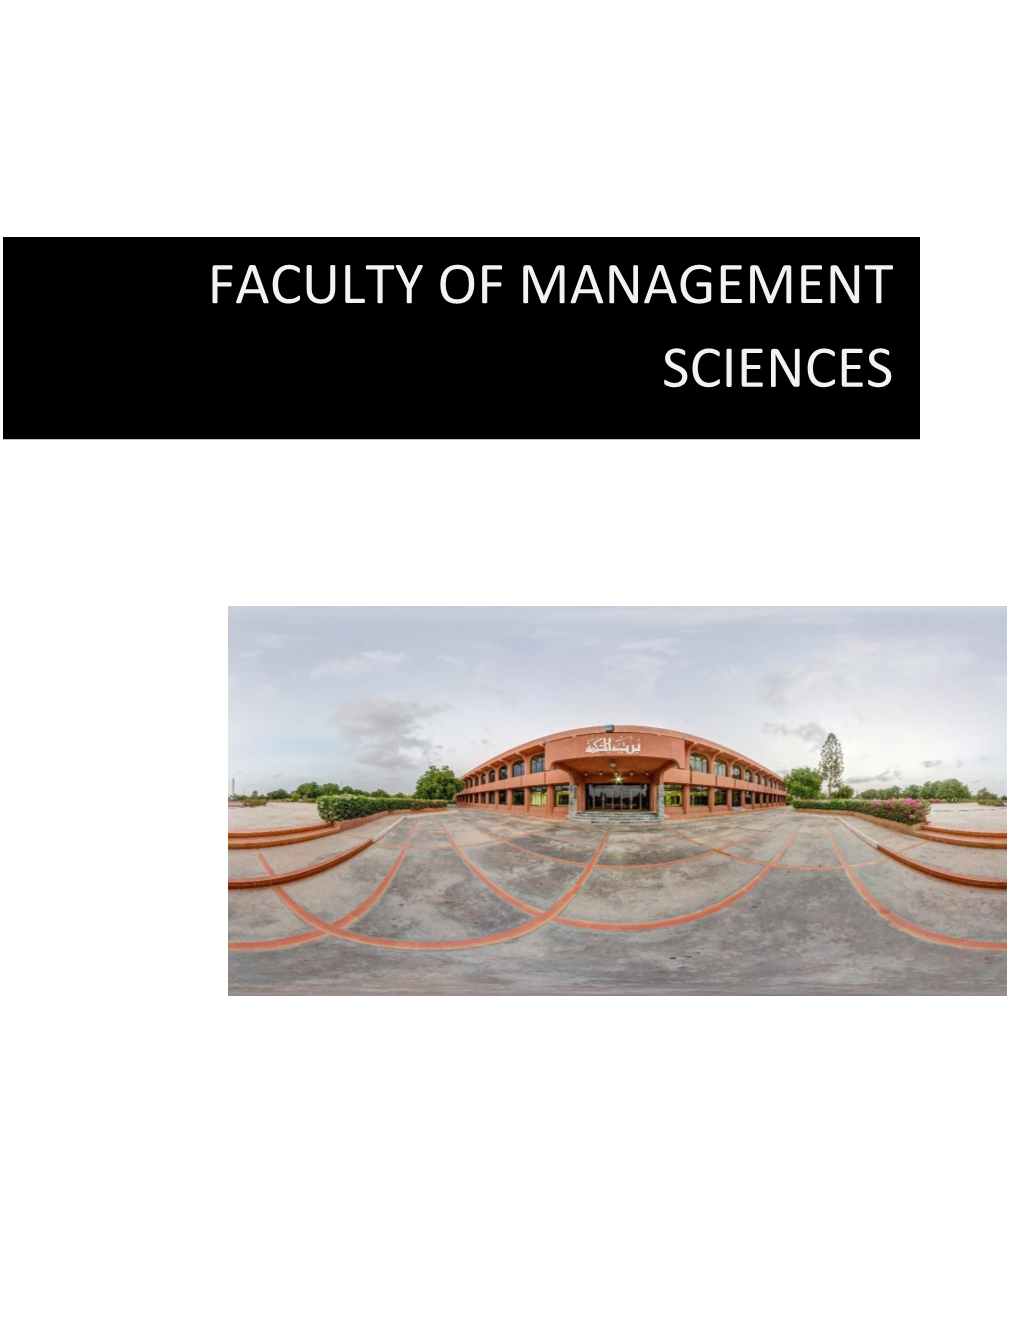 Faculty of Management Sciences